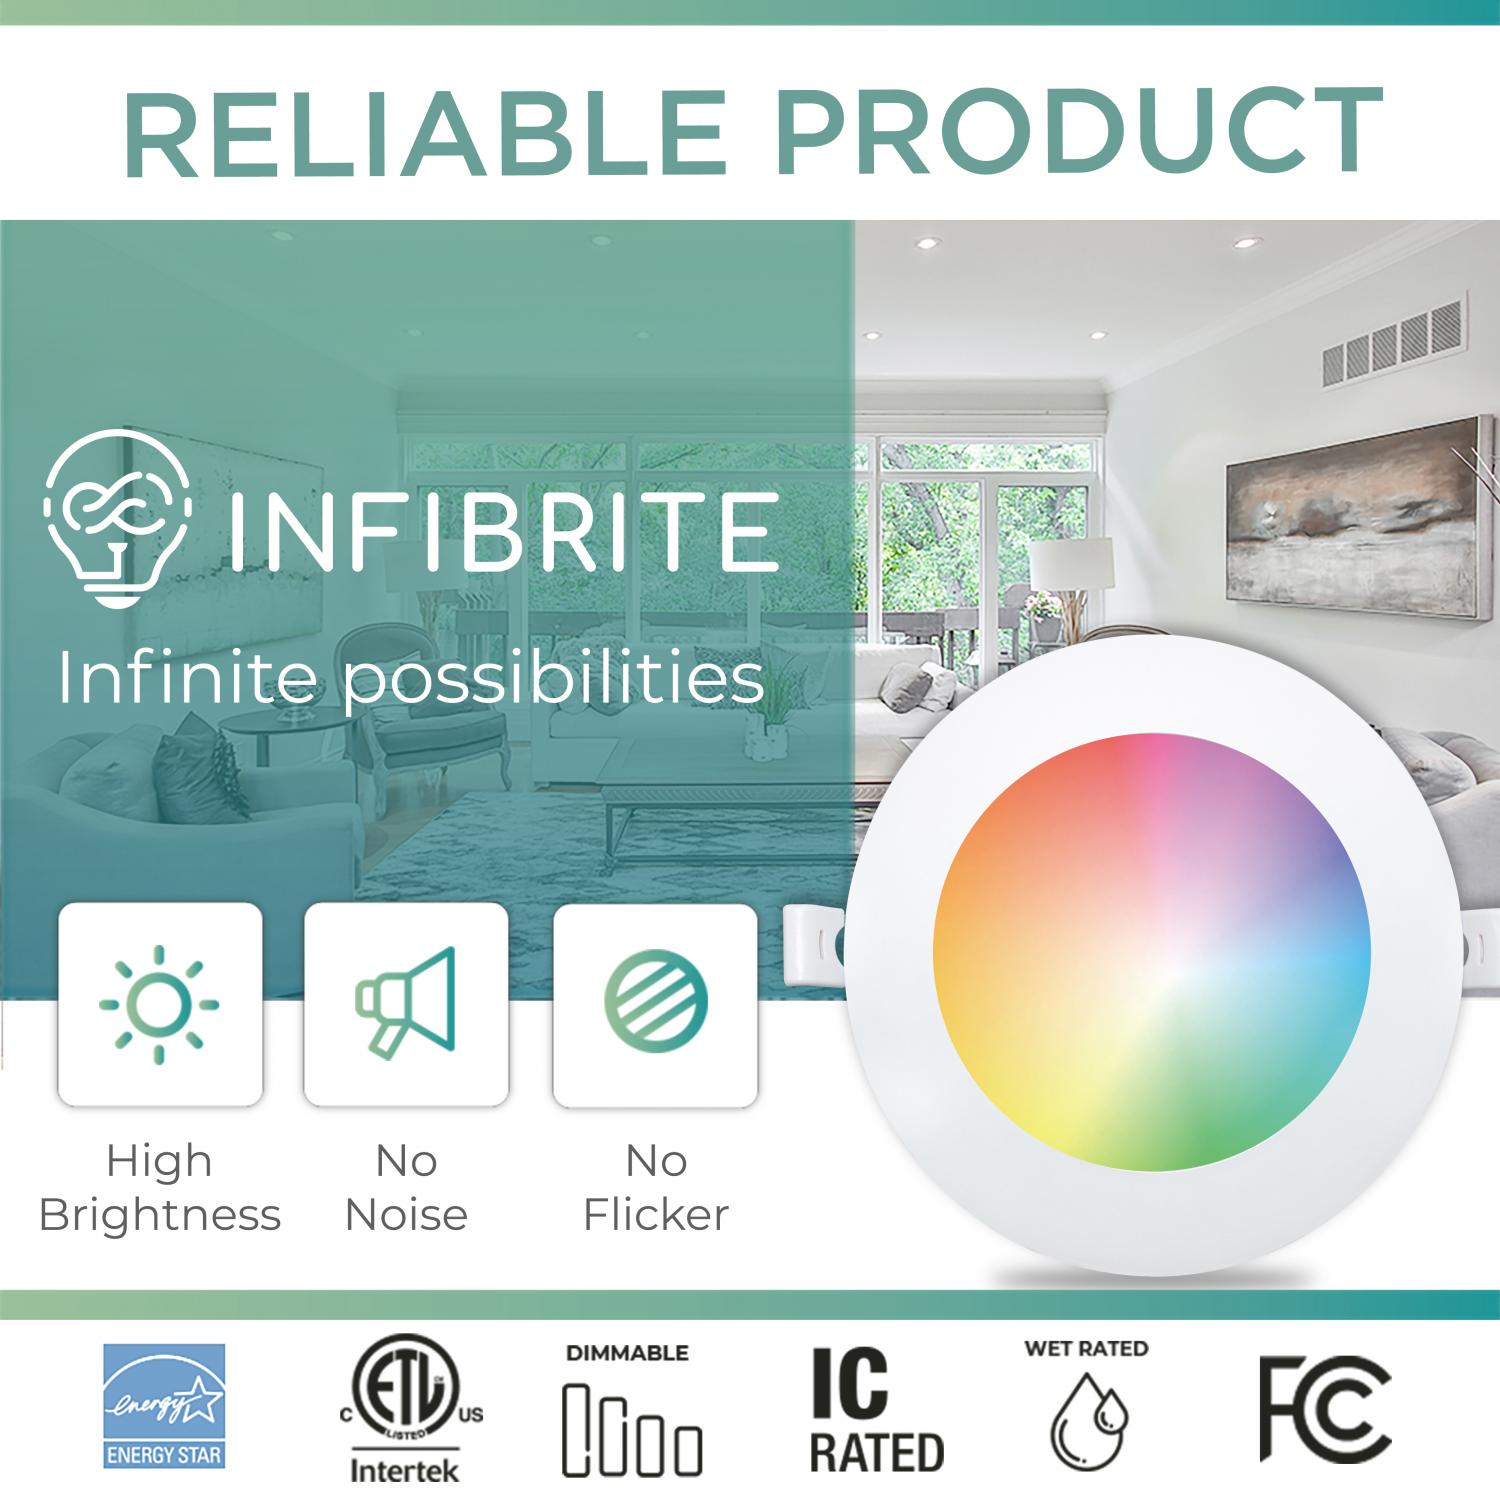 Infibrite 4 Inch Wifi Smart Ultra-Slim LED Ceiling Mount Recessed Light 9W 810LM Dimmable Retrofit with Junction Box, Easy Install, App & Voice Control, Alexa/Google Compatible, ETL & Energy Star, Wet Rated